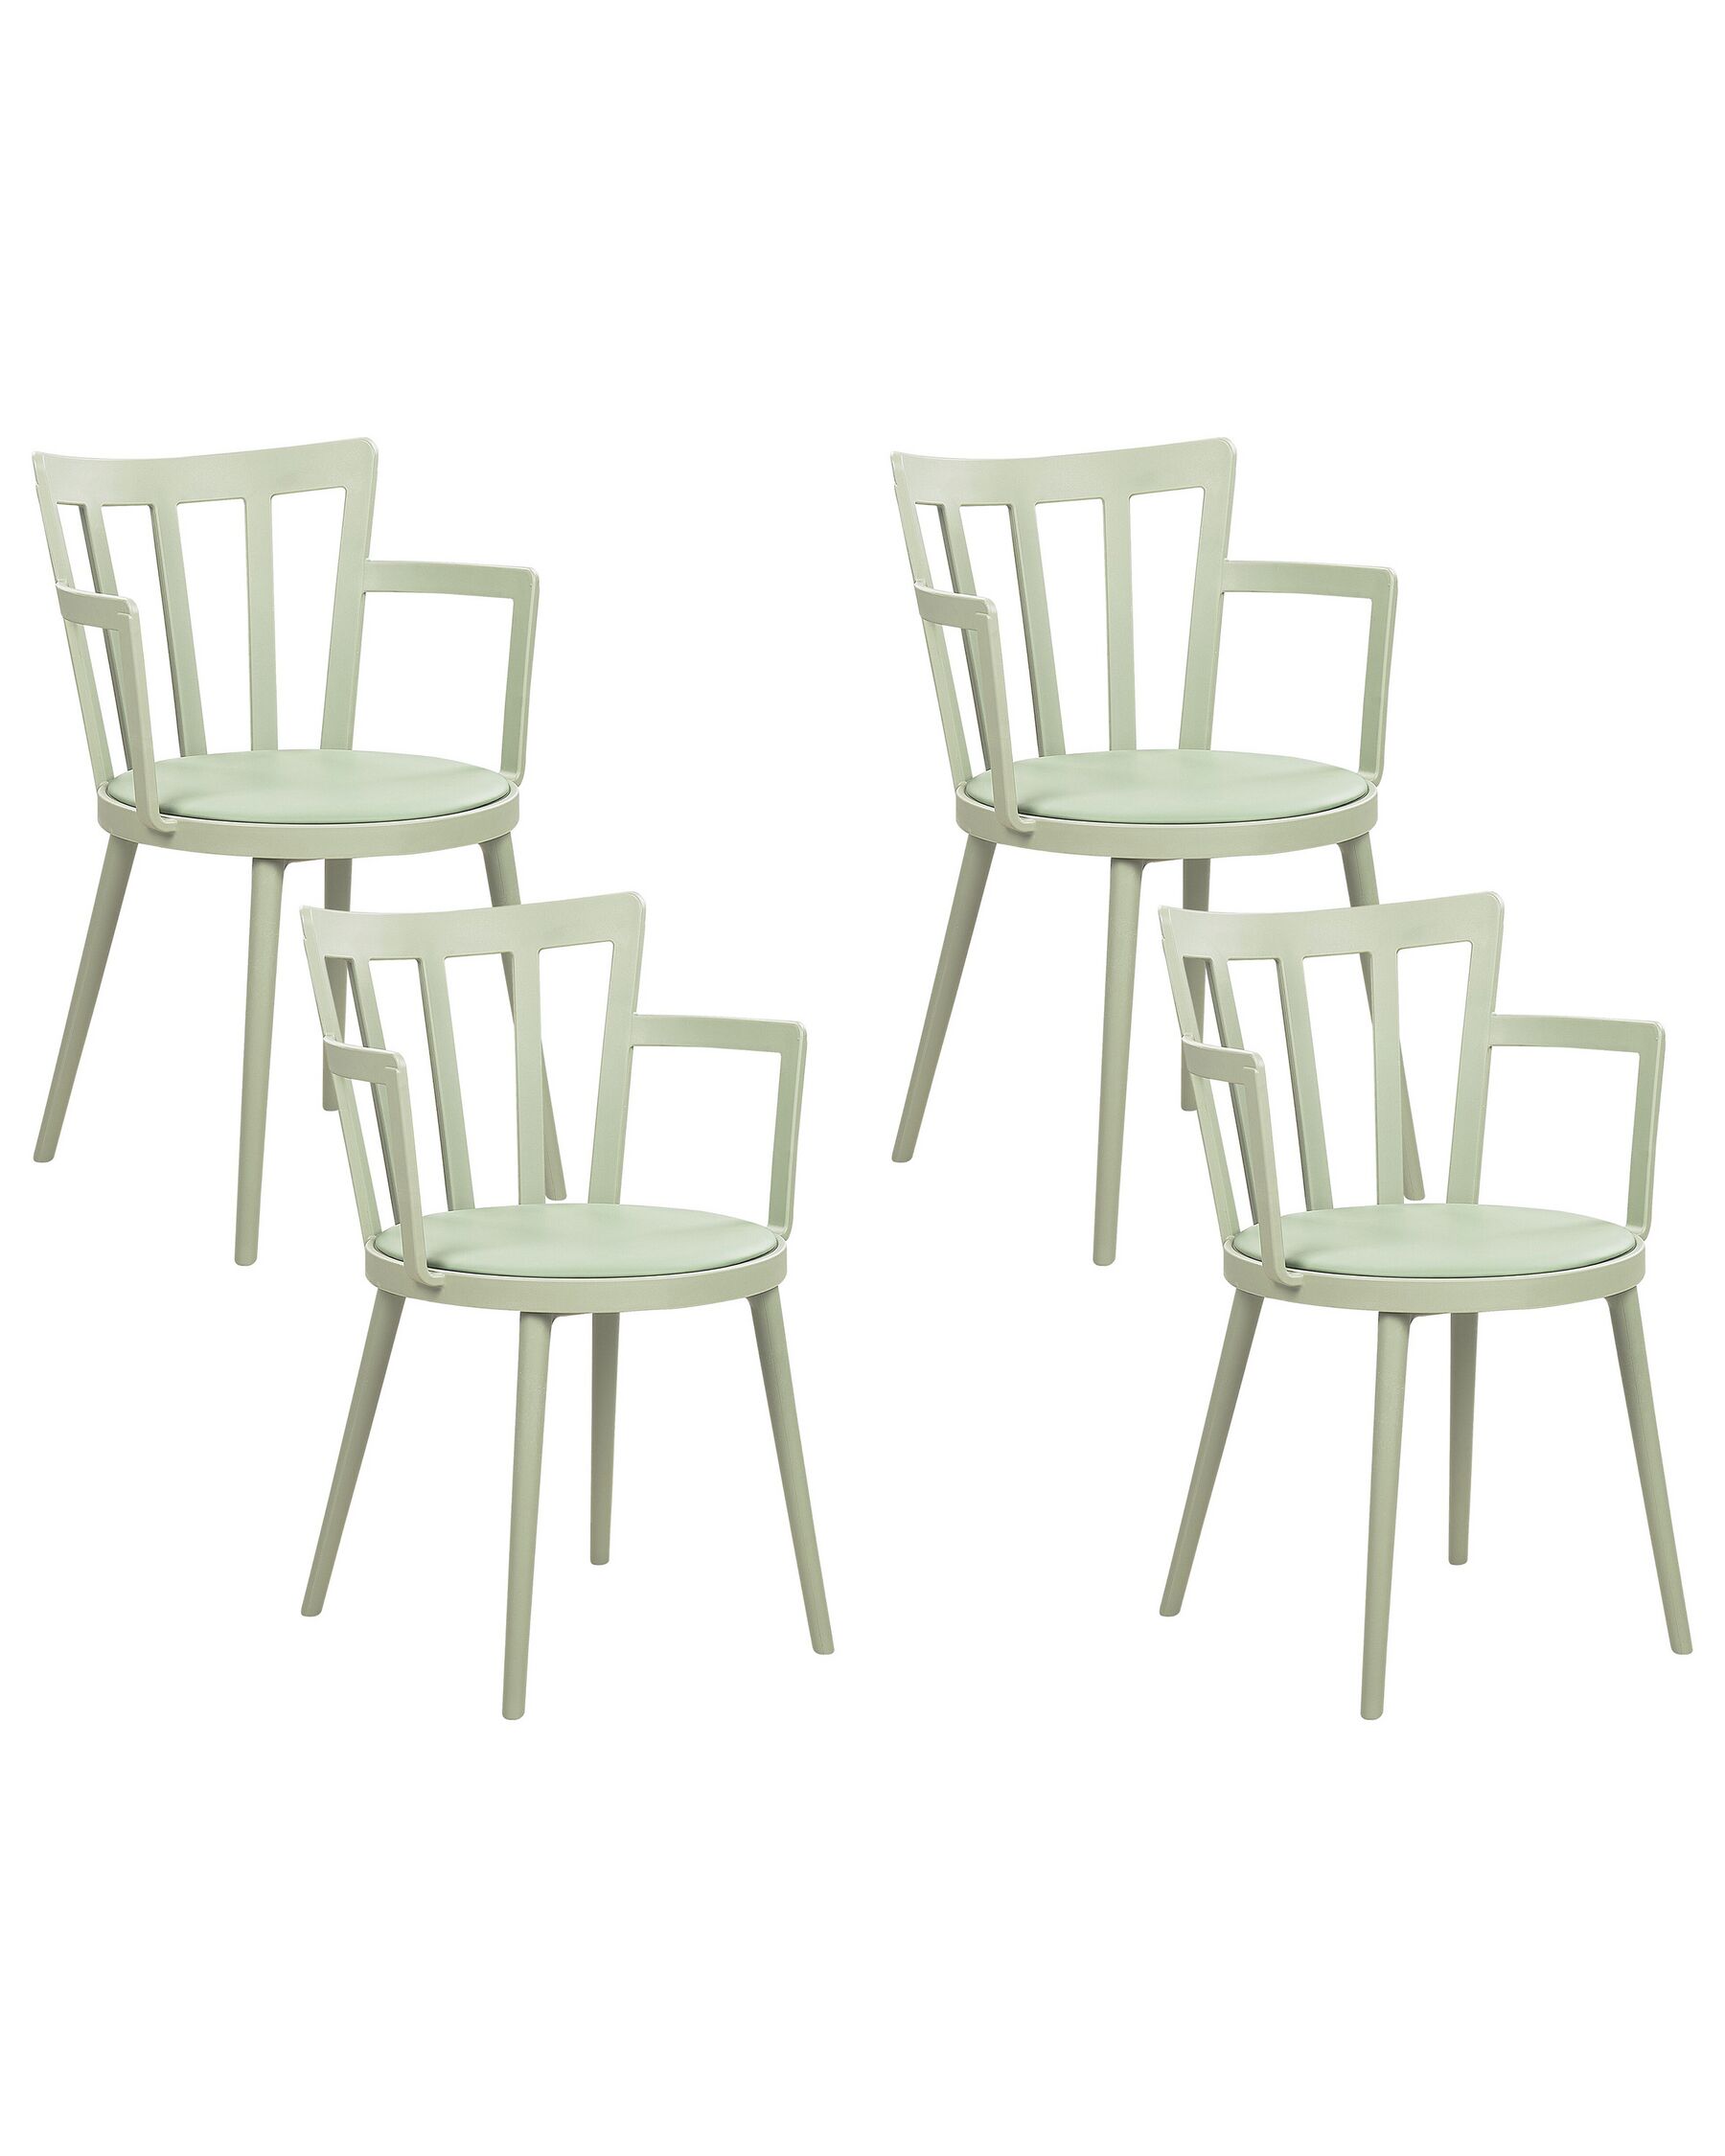 Set of 4 Plastic Dining Chairs Green MORILL_876310